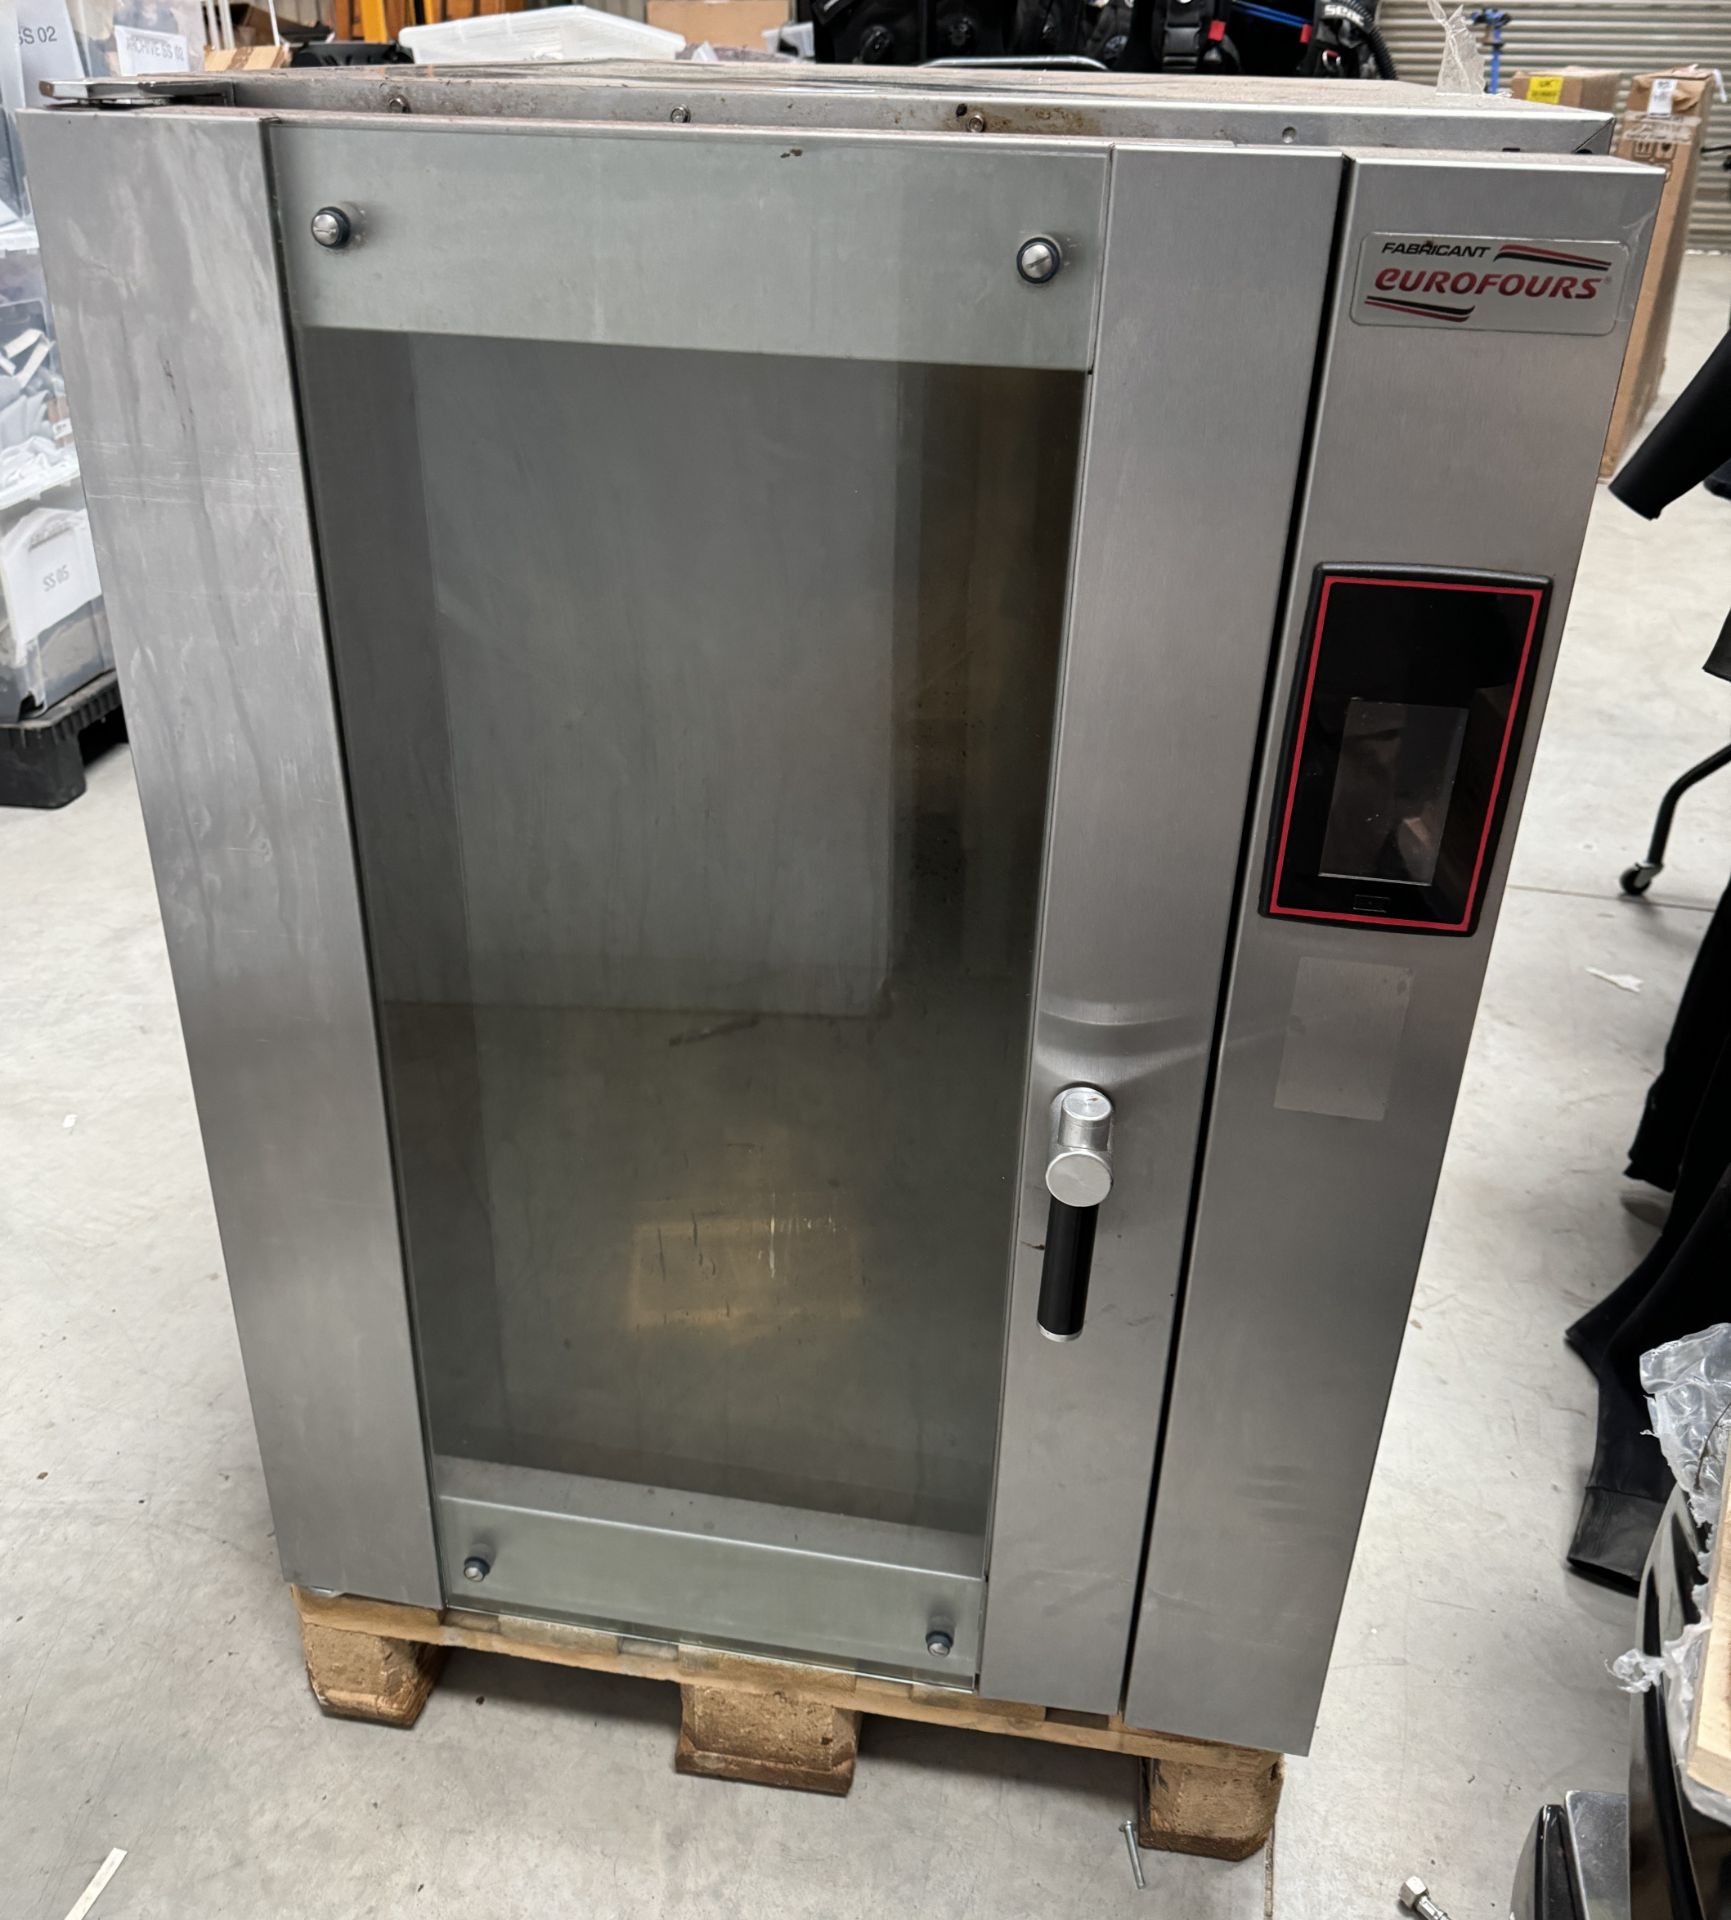 Eurofours Type FVE10A-20 Convector Oven (2014), 3 Phase, Serial Number FVE10A0003 (Location: